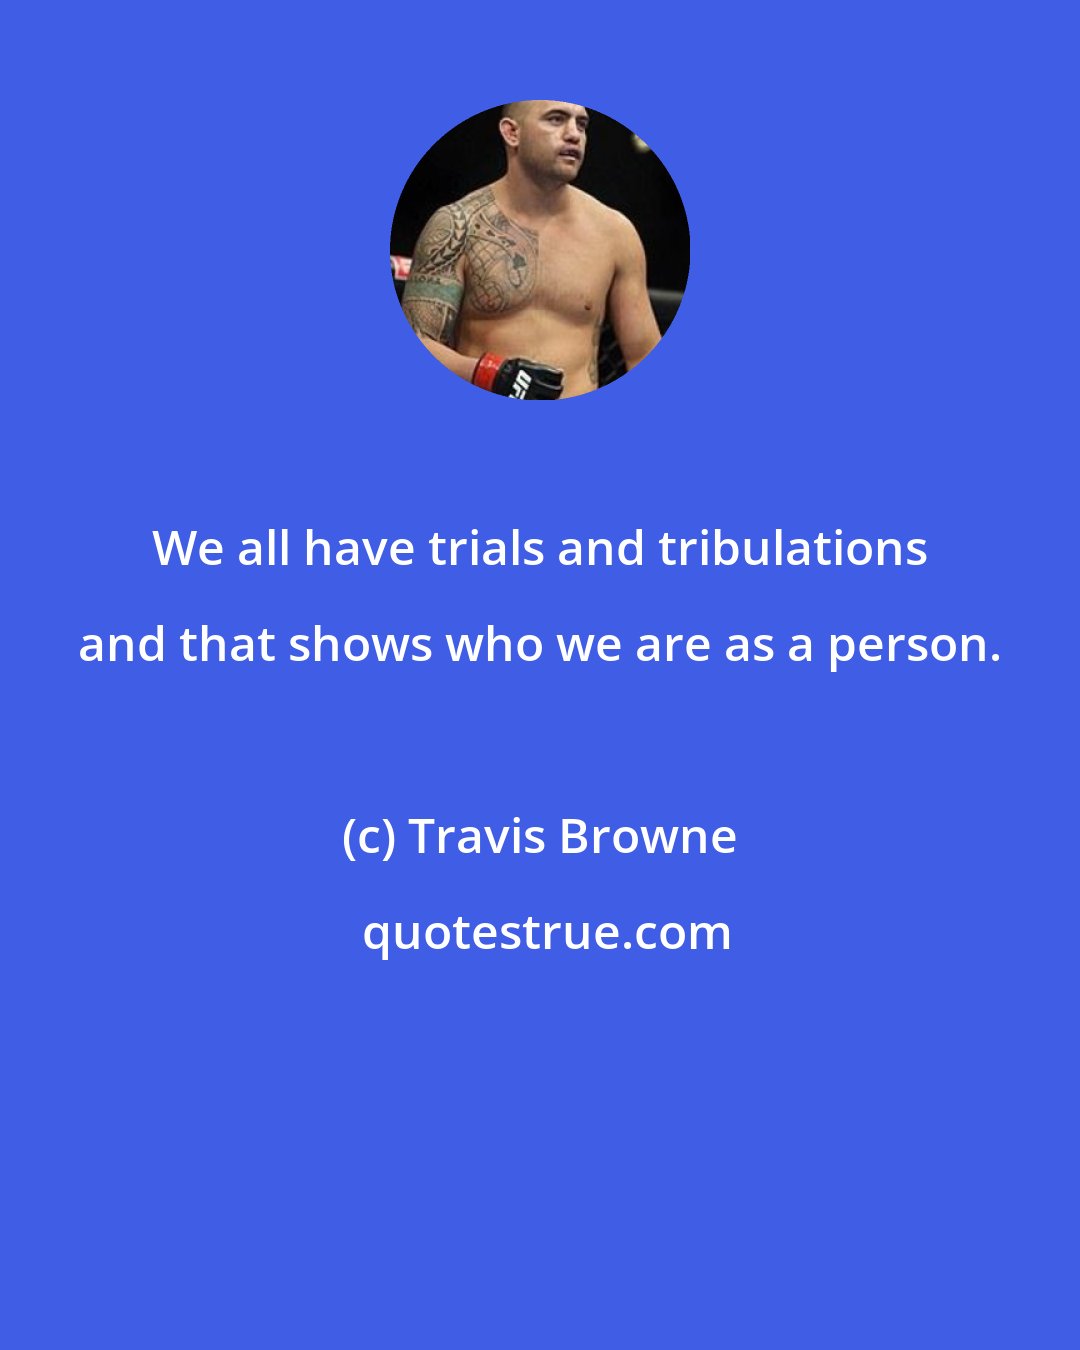 Travis Browne: We all have trials and tribulations and that shows who we are as a person.